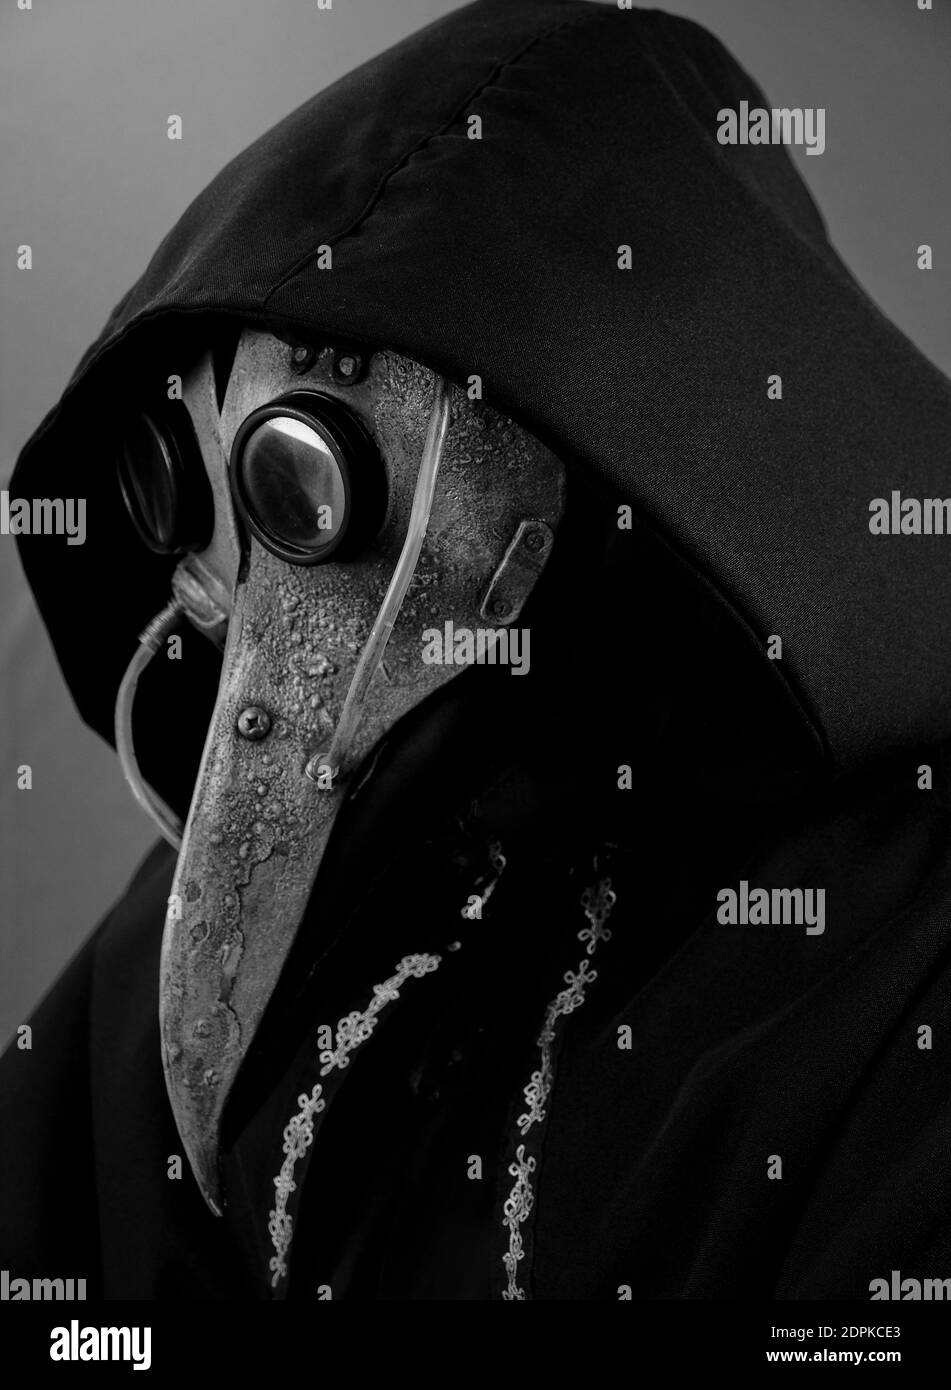 Doctor plague steampunk mask Stock Photo